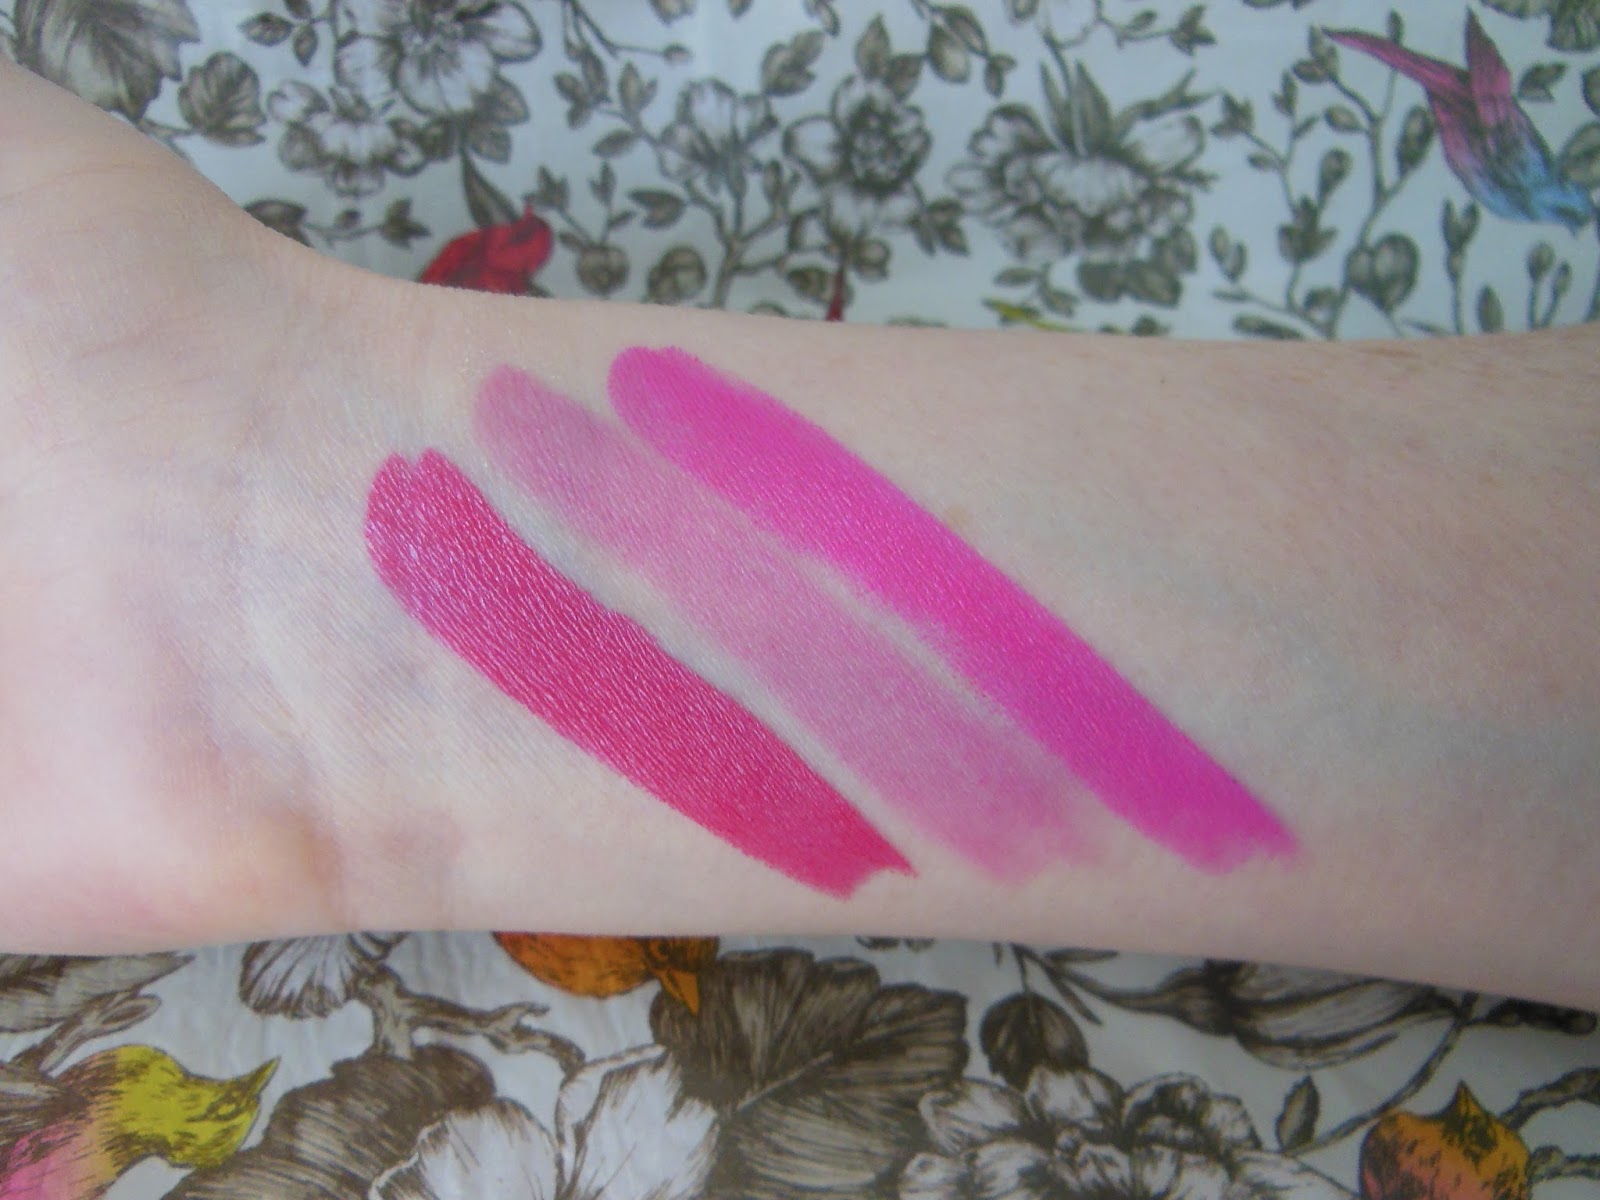 17 Stay Pout Delinquent, Revlon and MAc Candy Yum Yum lipstick swatches